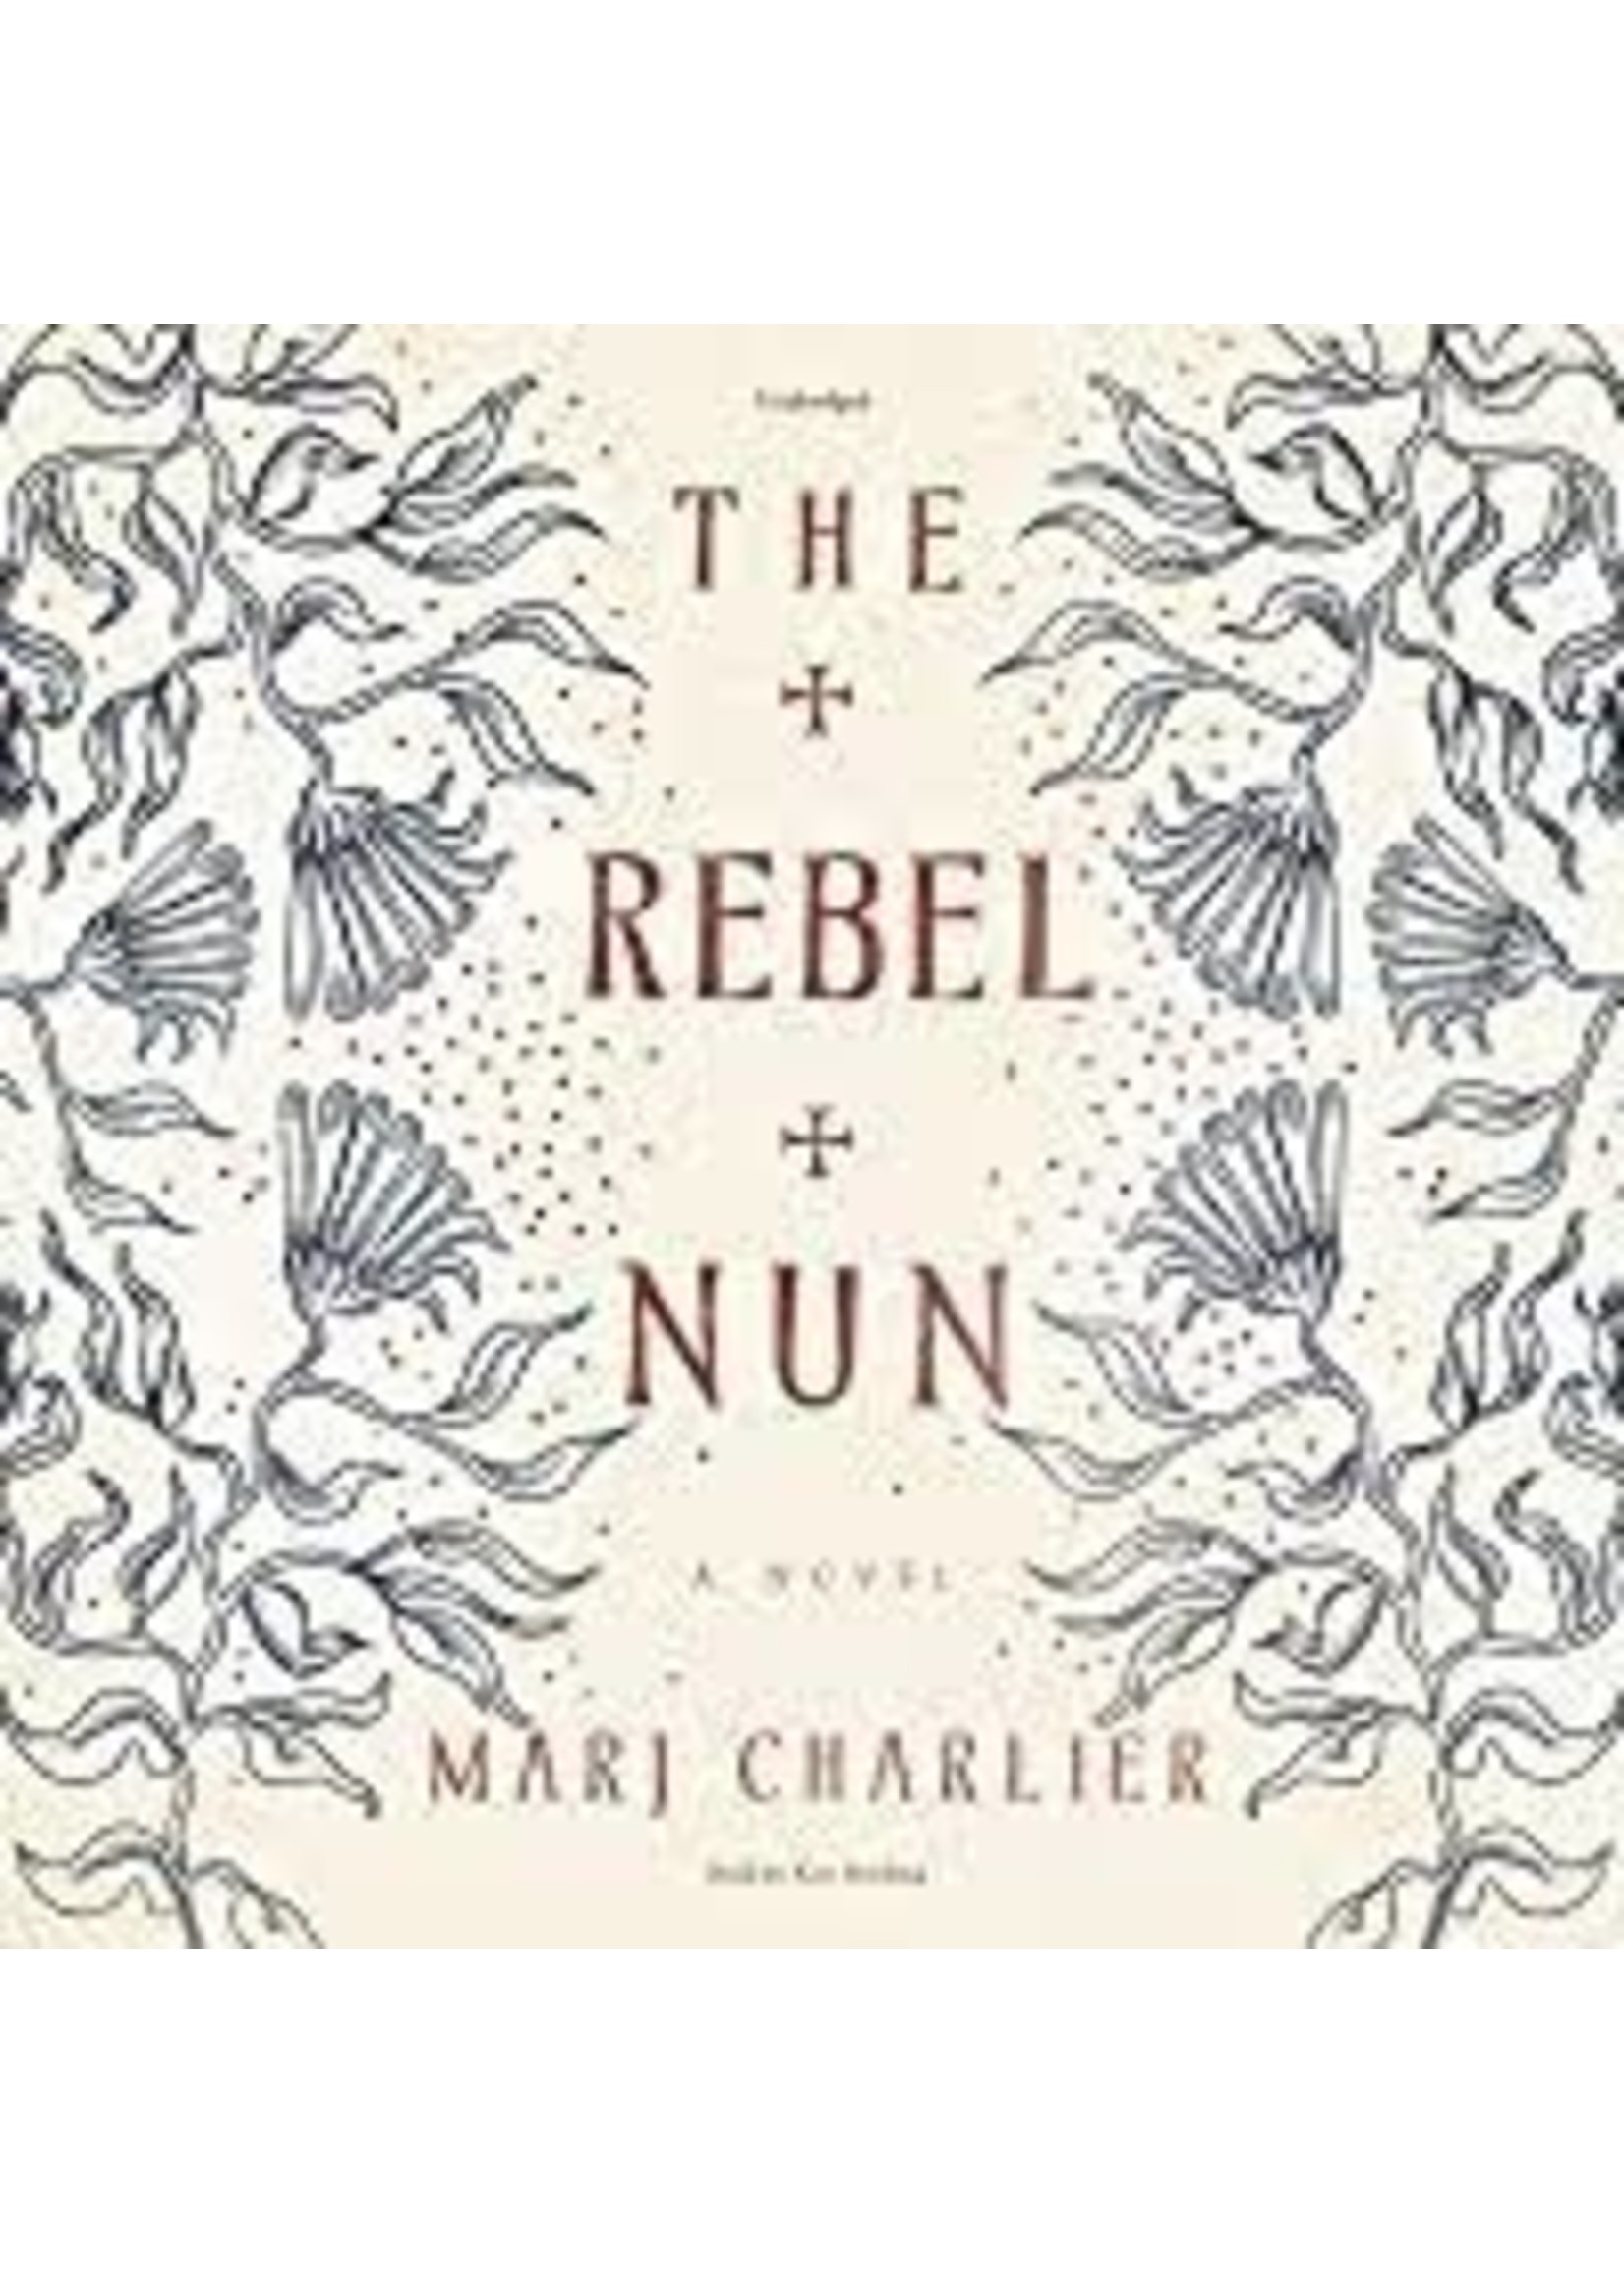 The Rebel Nun  by Marj Charlier - Paper